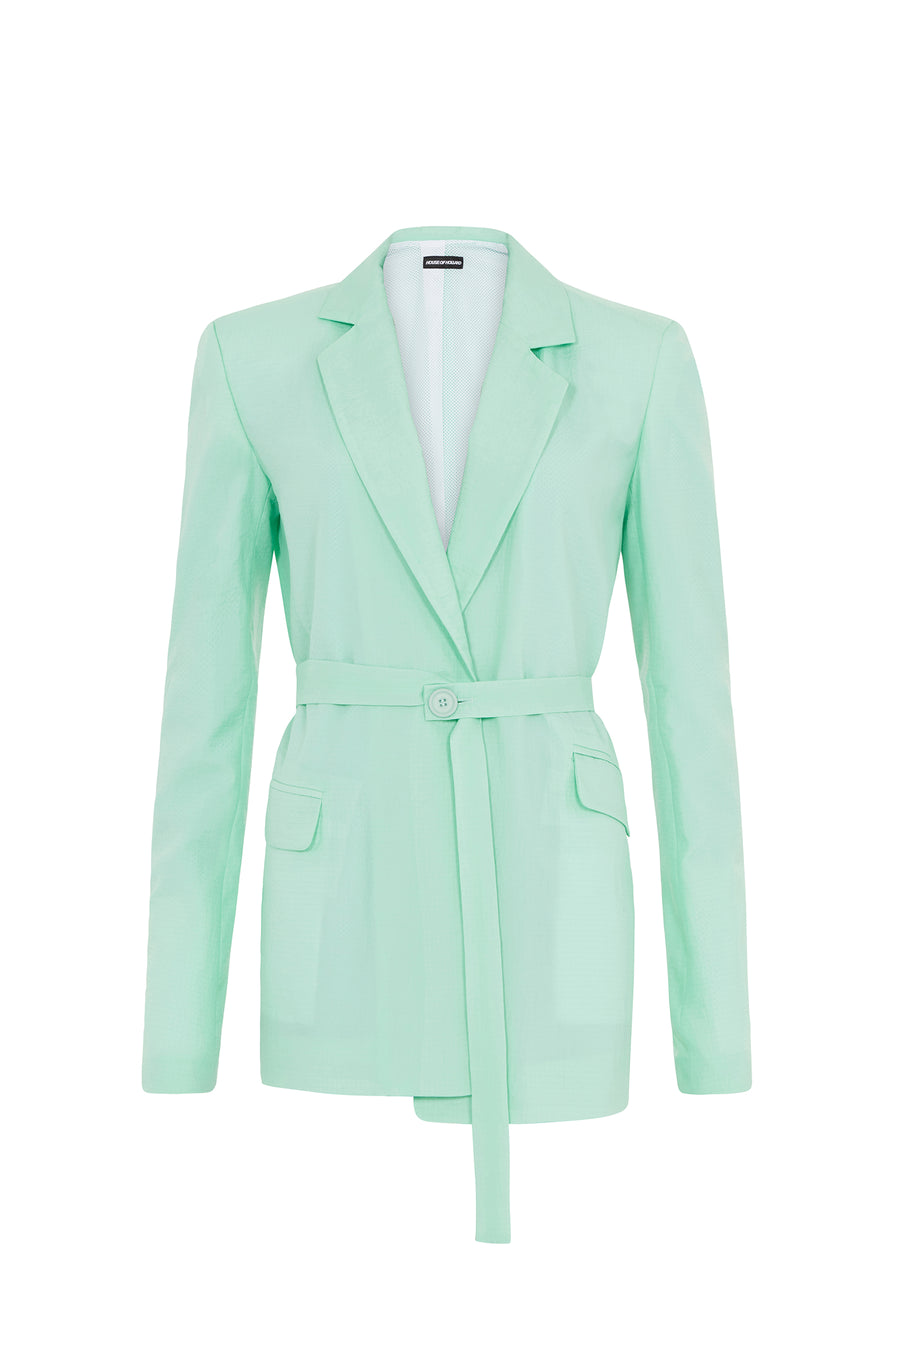 Ripstop Tailored Jacket (Mint Green) by House of Holland